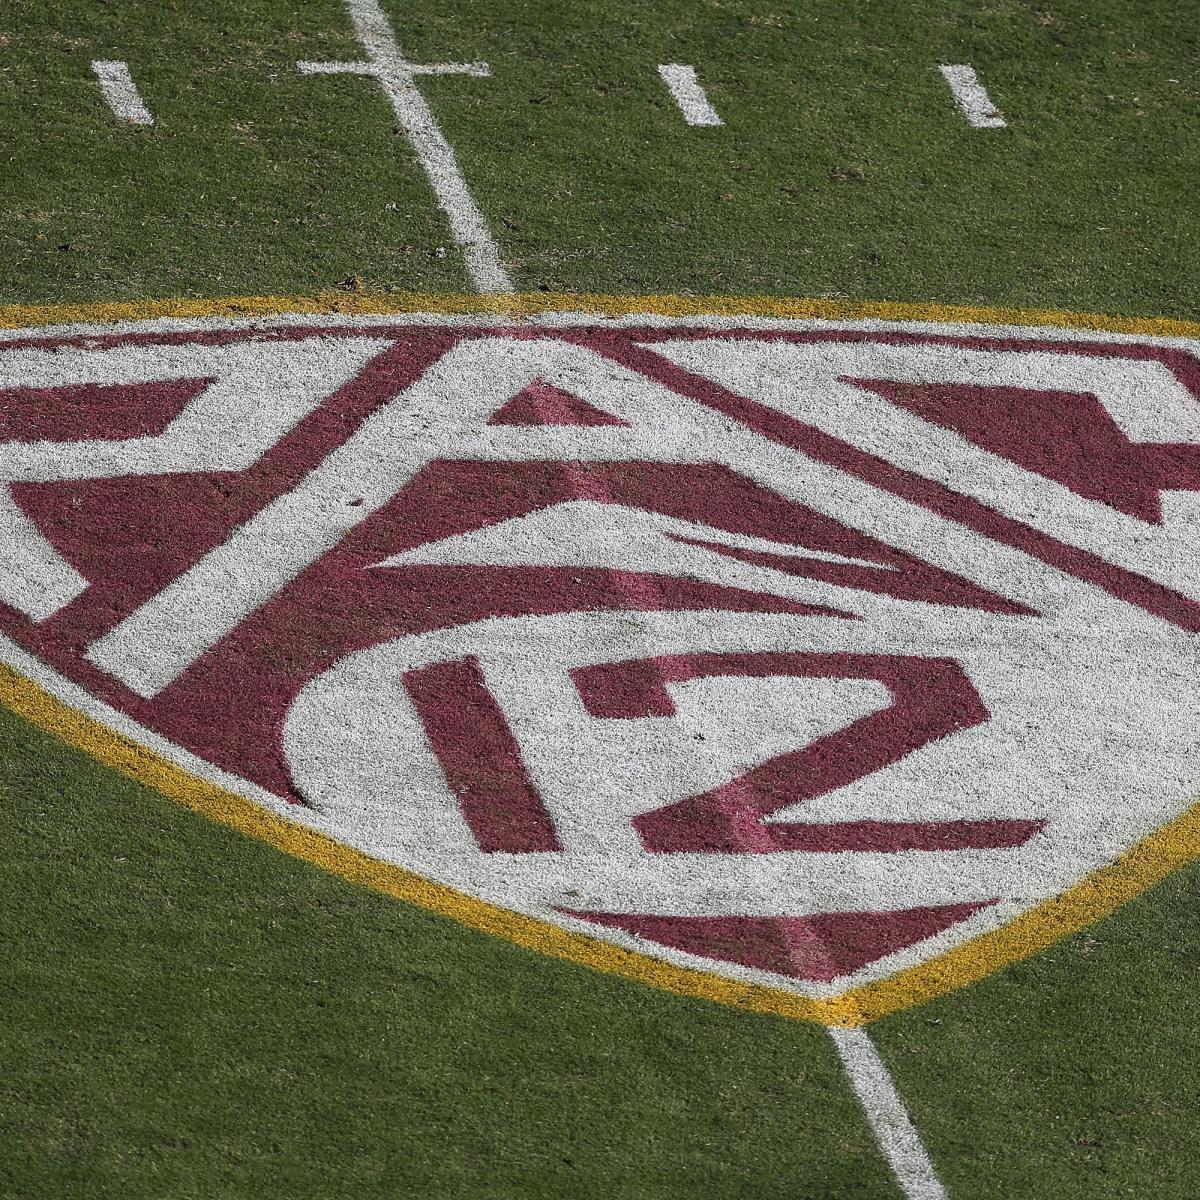 Bo Graham, Todd's Son, Reportedly Resigns Due to Relationship with ASU Student